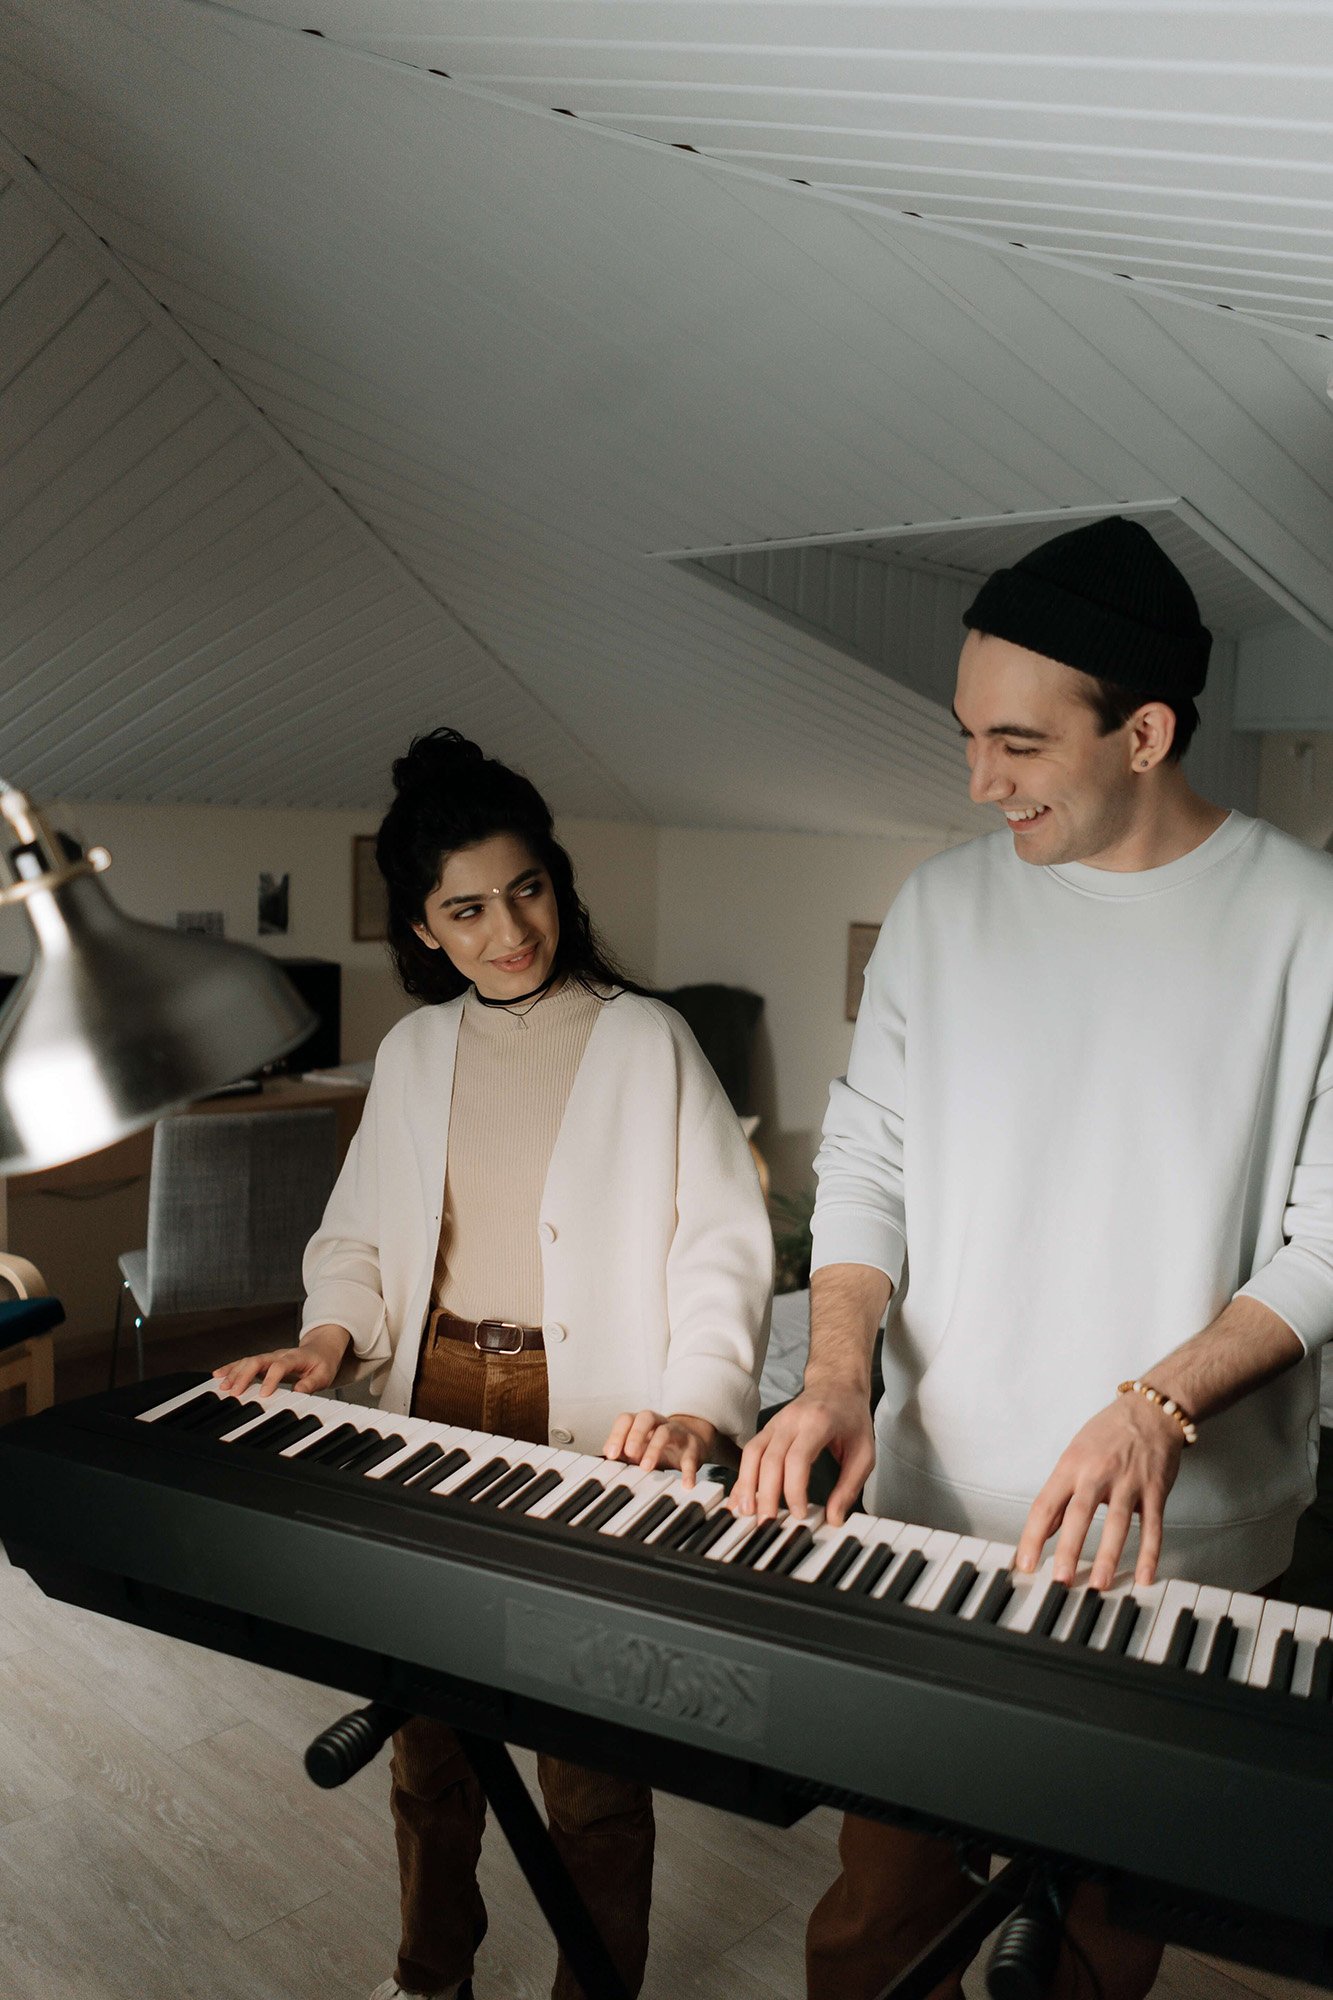 Man and woman playing keyboard together in low ceiling room.